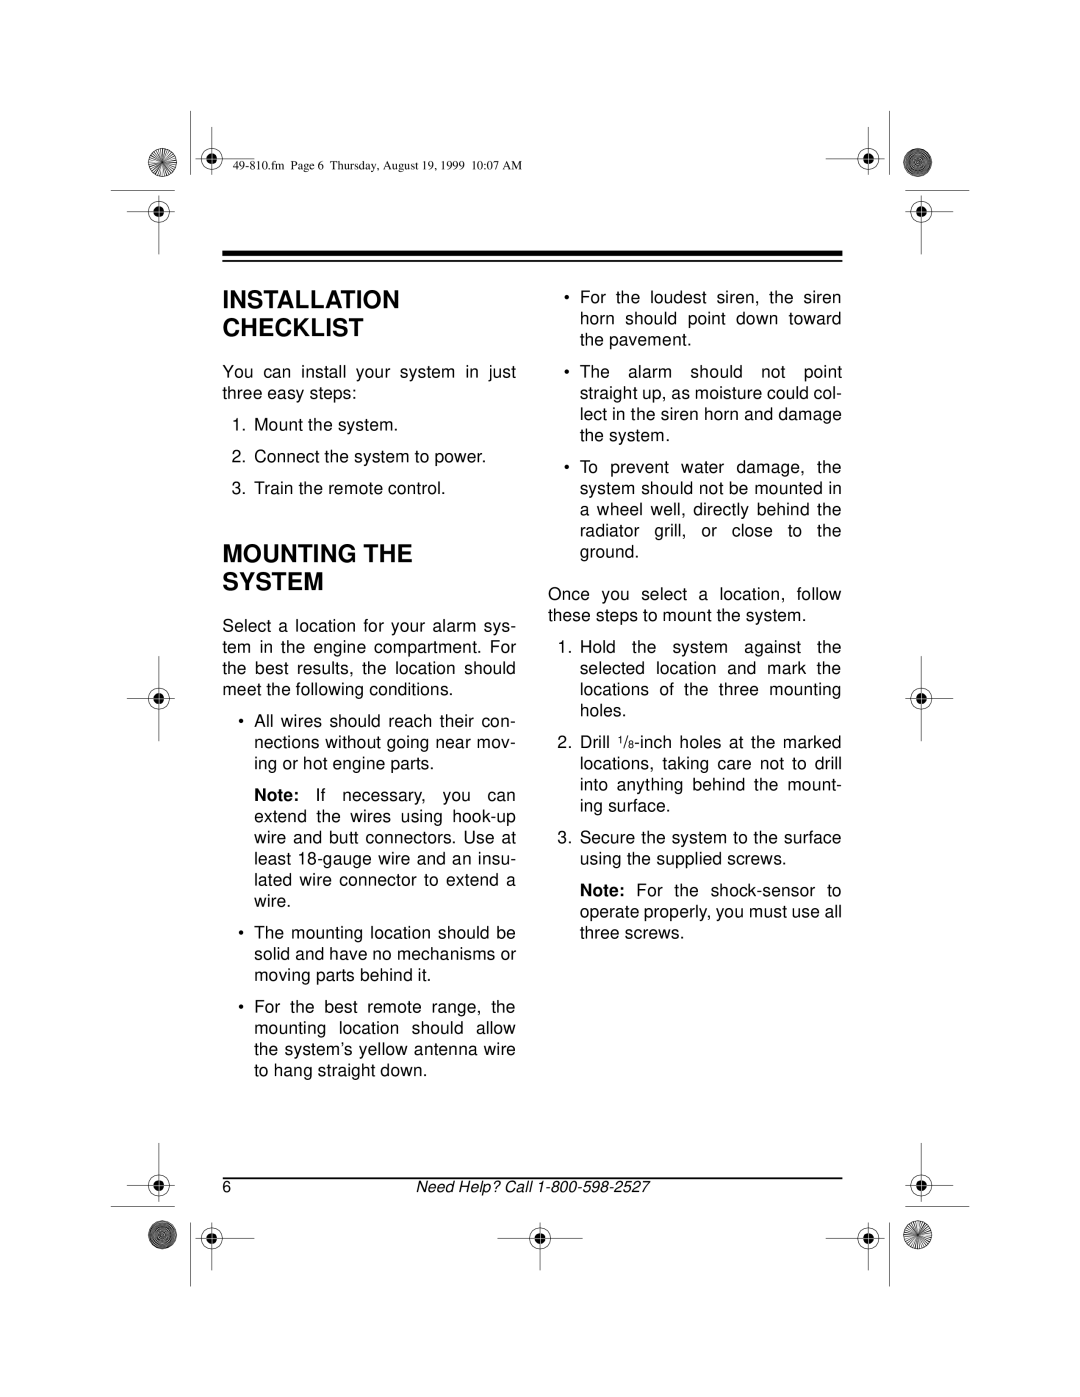 Radio Shack RS-1000 owner manual Installation Checklist, Mounting The System 